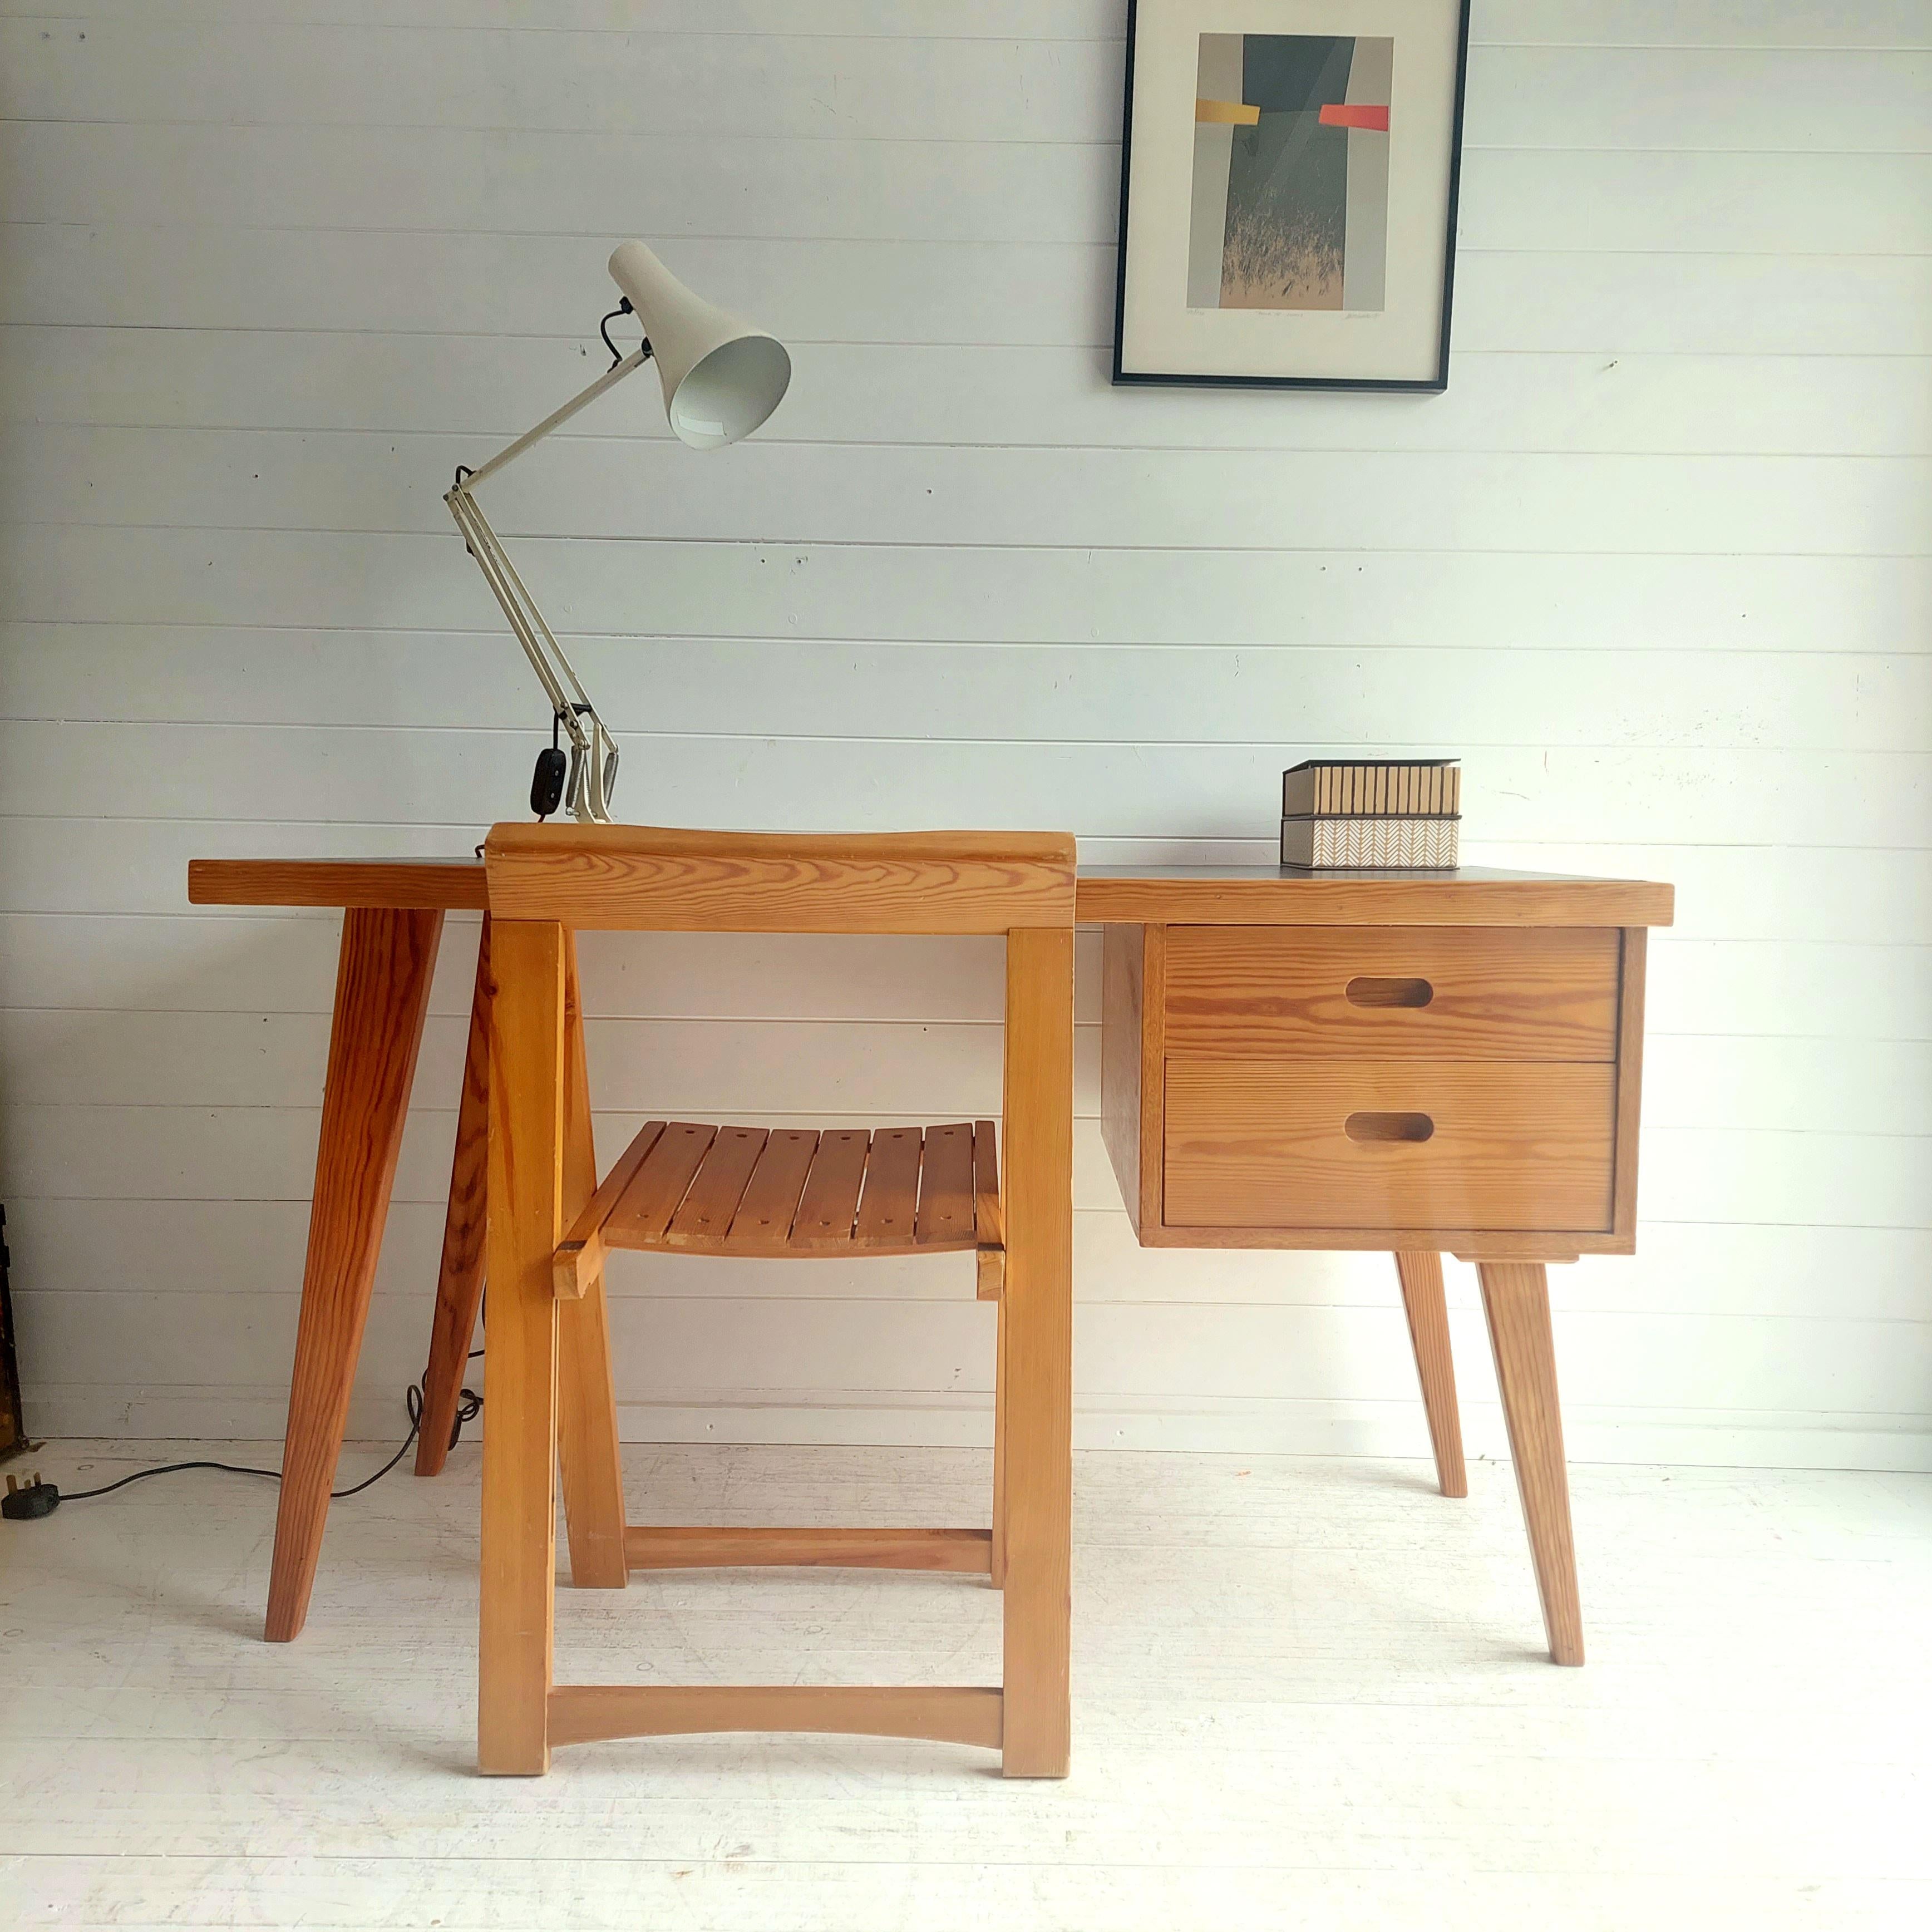 Mid Century  Paul McCobb/Baumann style office desk of the 1960s.
Vintage Scandinavian Design Writing Desk

Structure and compass legs in pitch pine 
Sides in beech wood. 
Black leatherette inserted top.
Single pedestal design:
Left side two conical